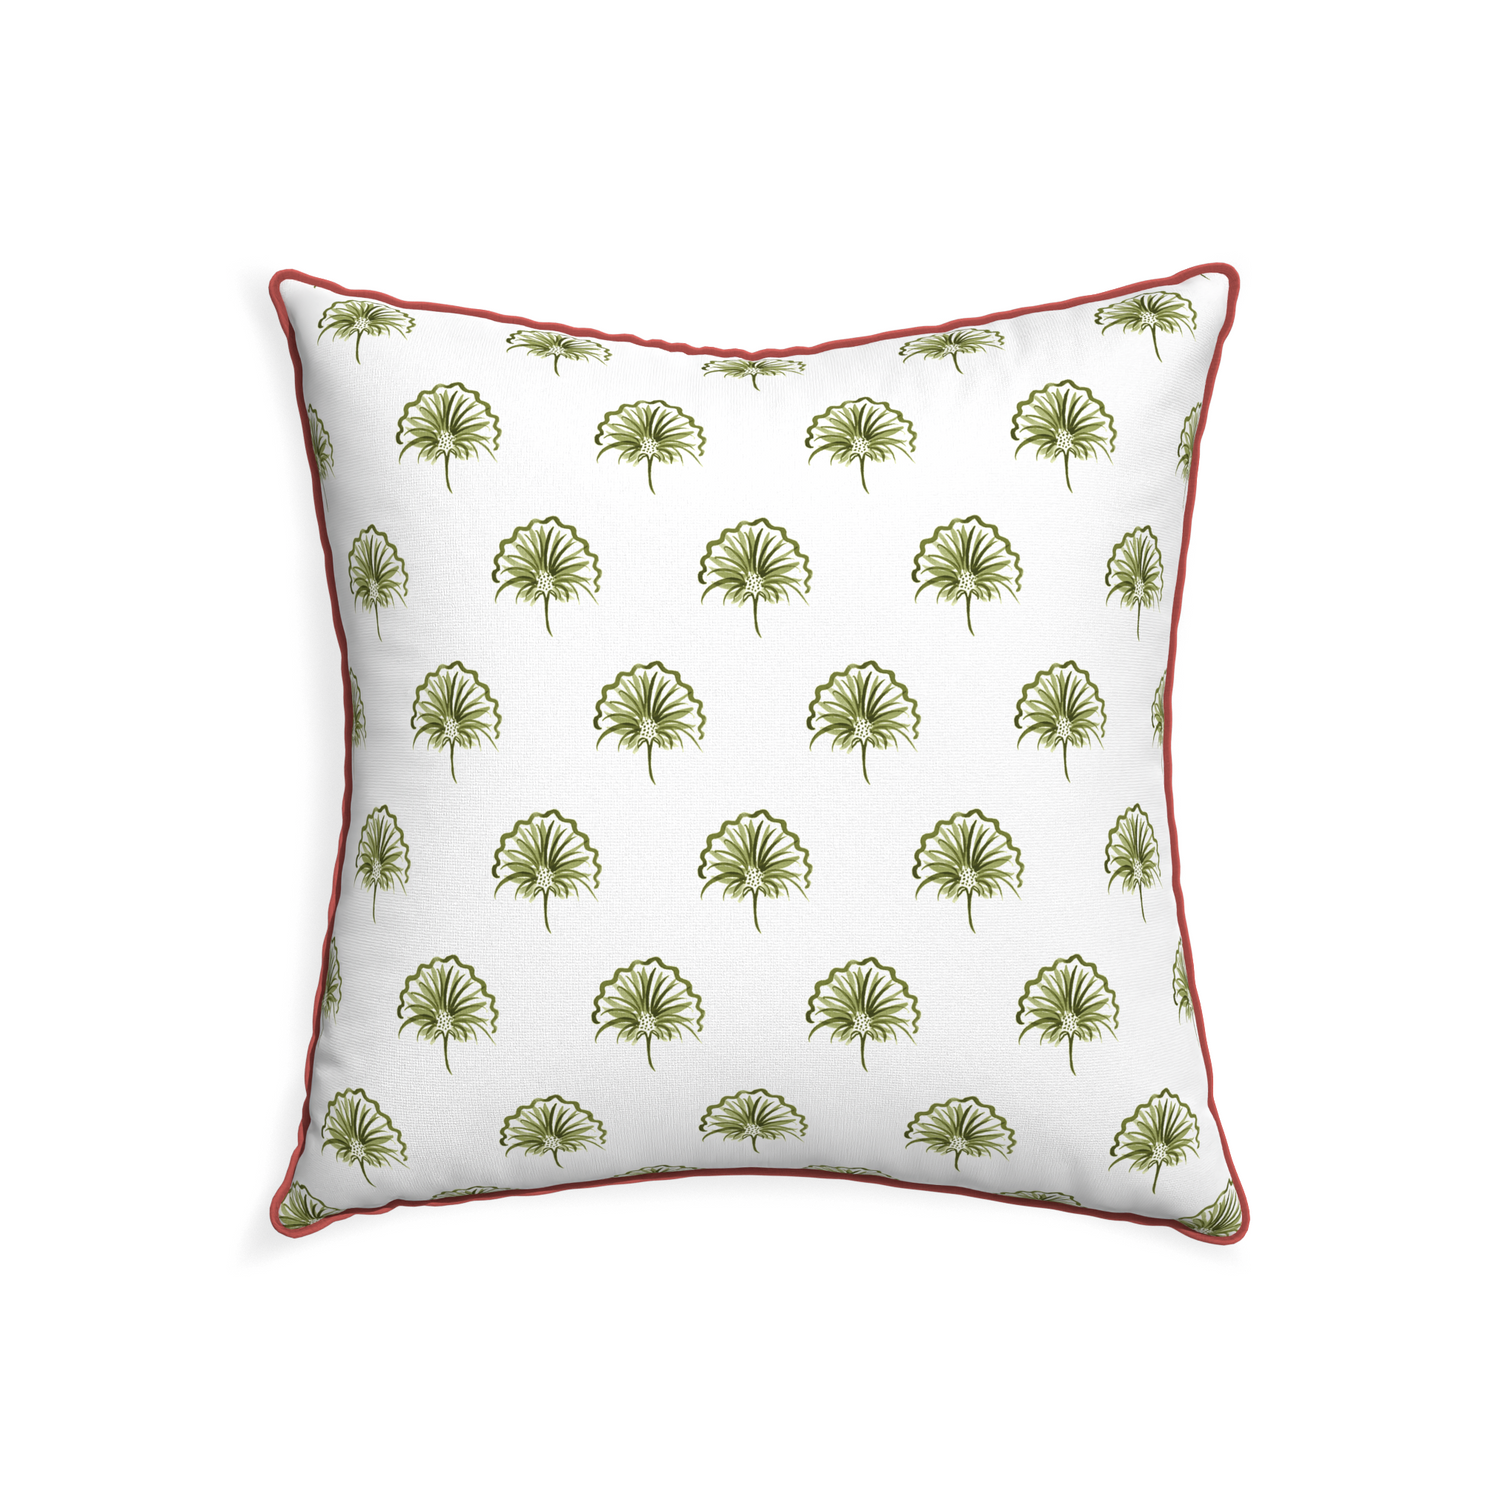 22-square penelope moss custom pillow with c piping on white background